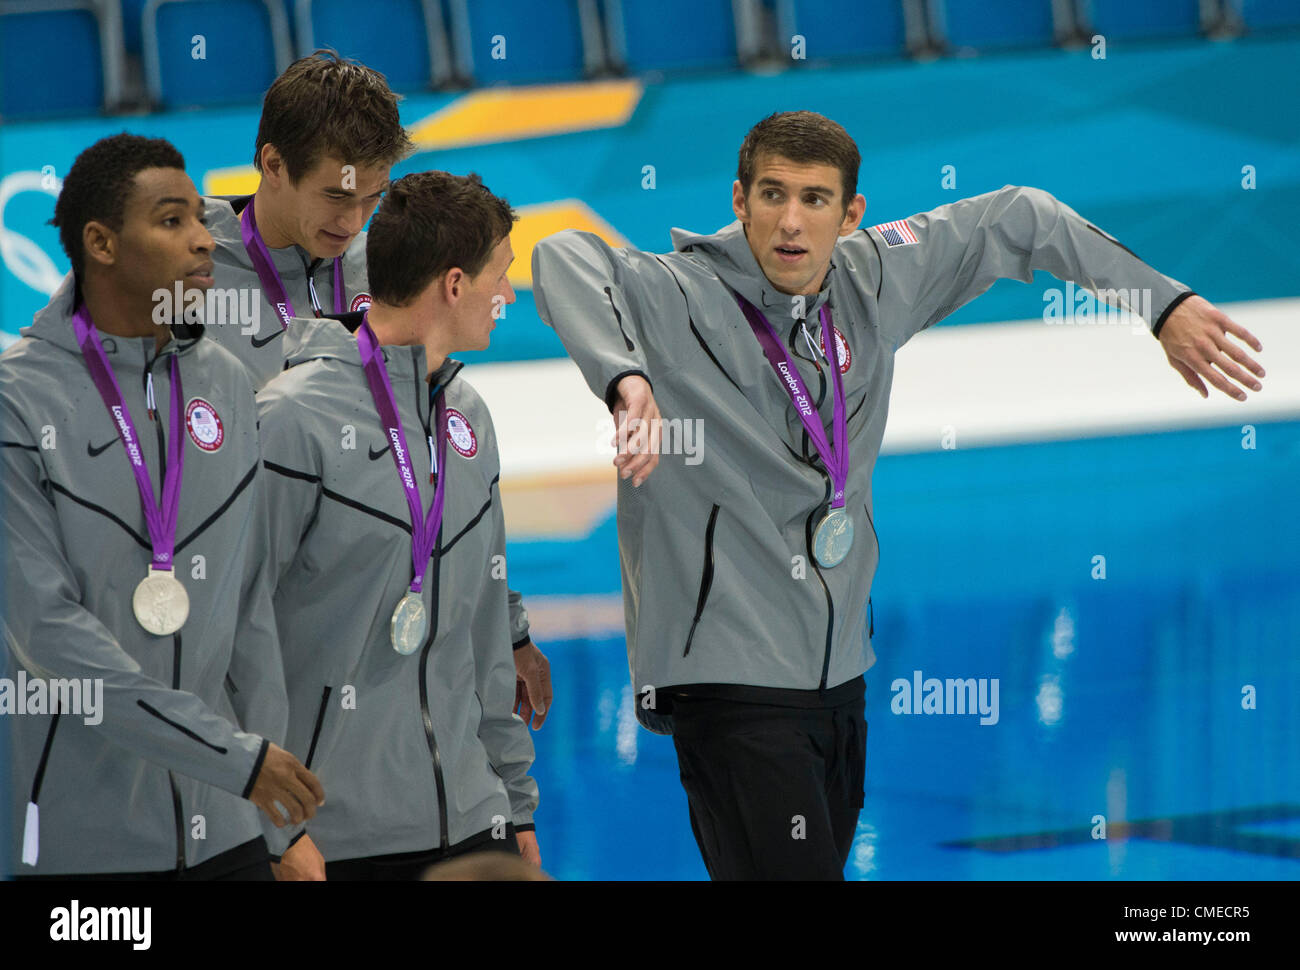 July 29, 2012 - London, England, United Kingdom - Silver medalists, Michael Phelps (USA) demonstrate his butterfly tech to Ryan Lochte , Adrian Nathan and Cullen Jones after the medal ceremony in the Men's 4 x 100m Freestyle Relay at the Aquatics Center on July 29, 2012 in London, United Kingdom. (Credit Image: © Paul Kitagaki Jr./ZUMAPRESS.com) Stock Photo